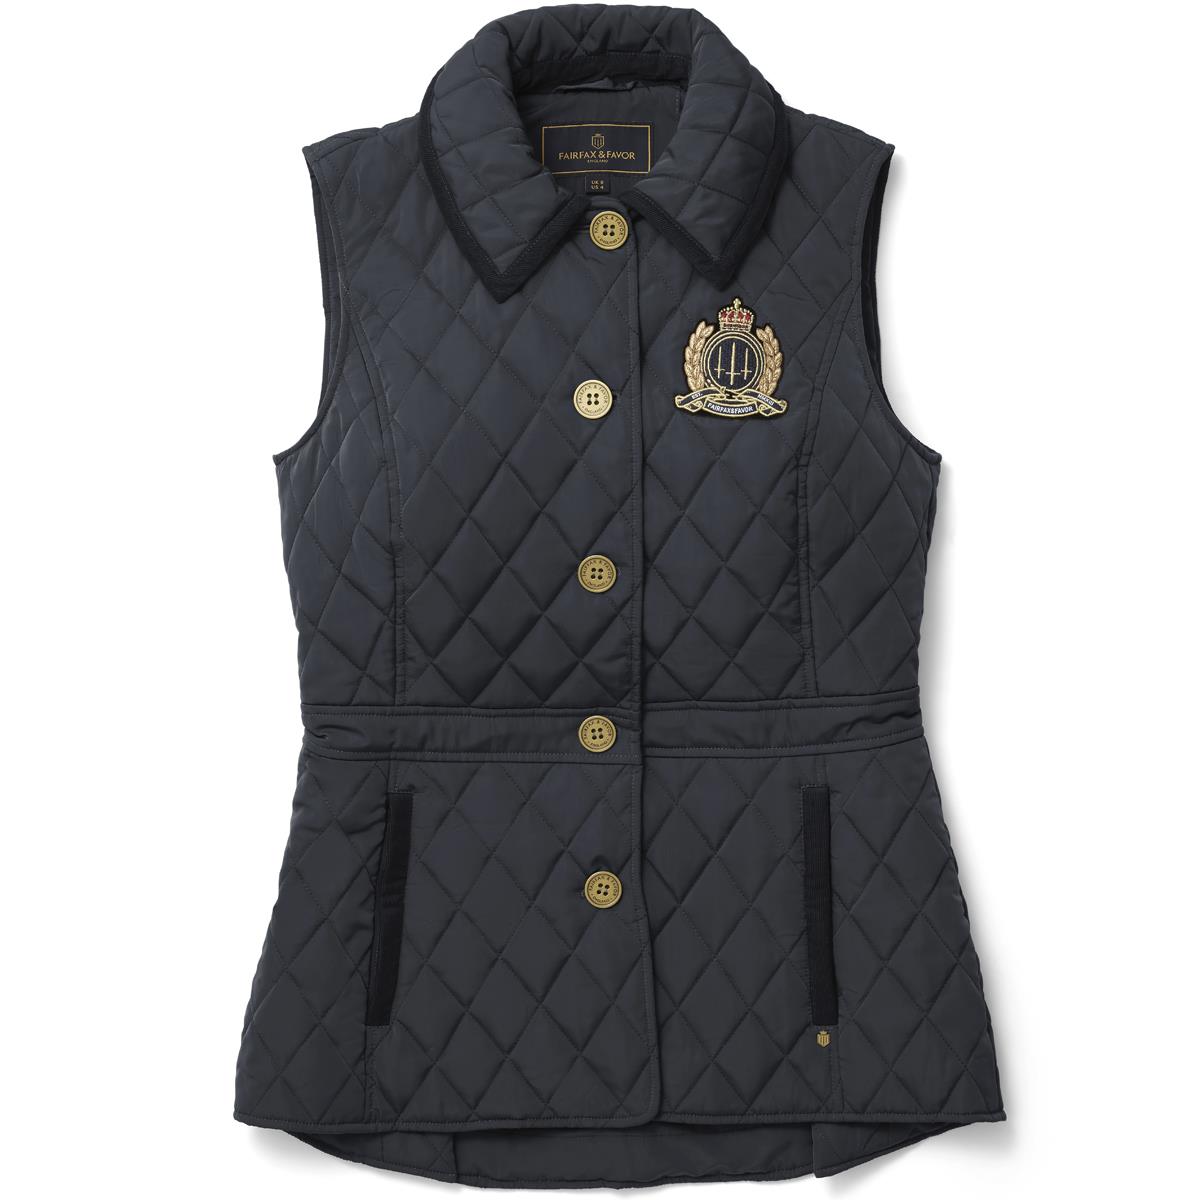 Fairfax & Favor Womens Bella Quilted Gilet Questions & Answers